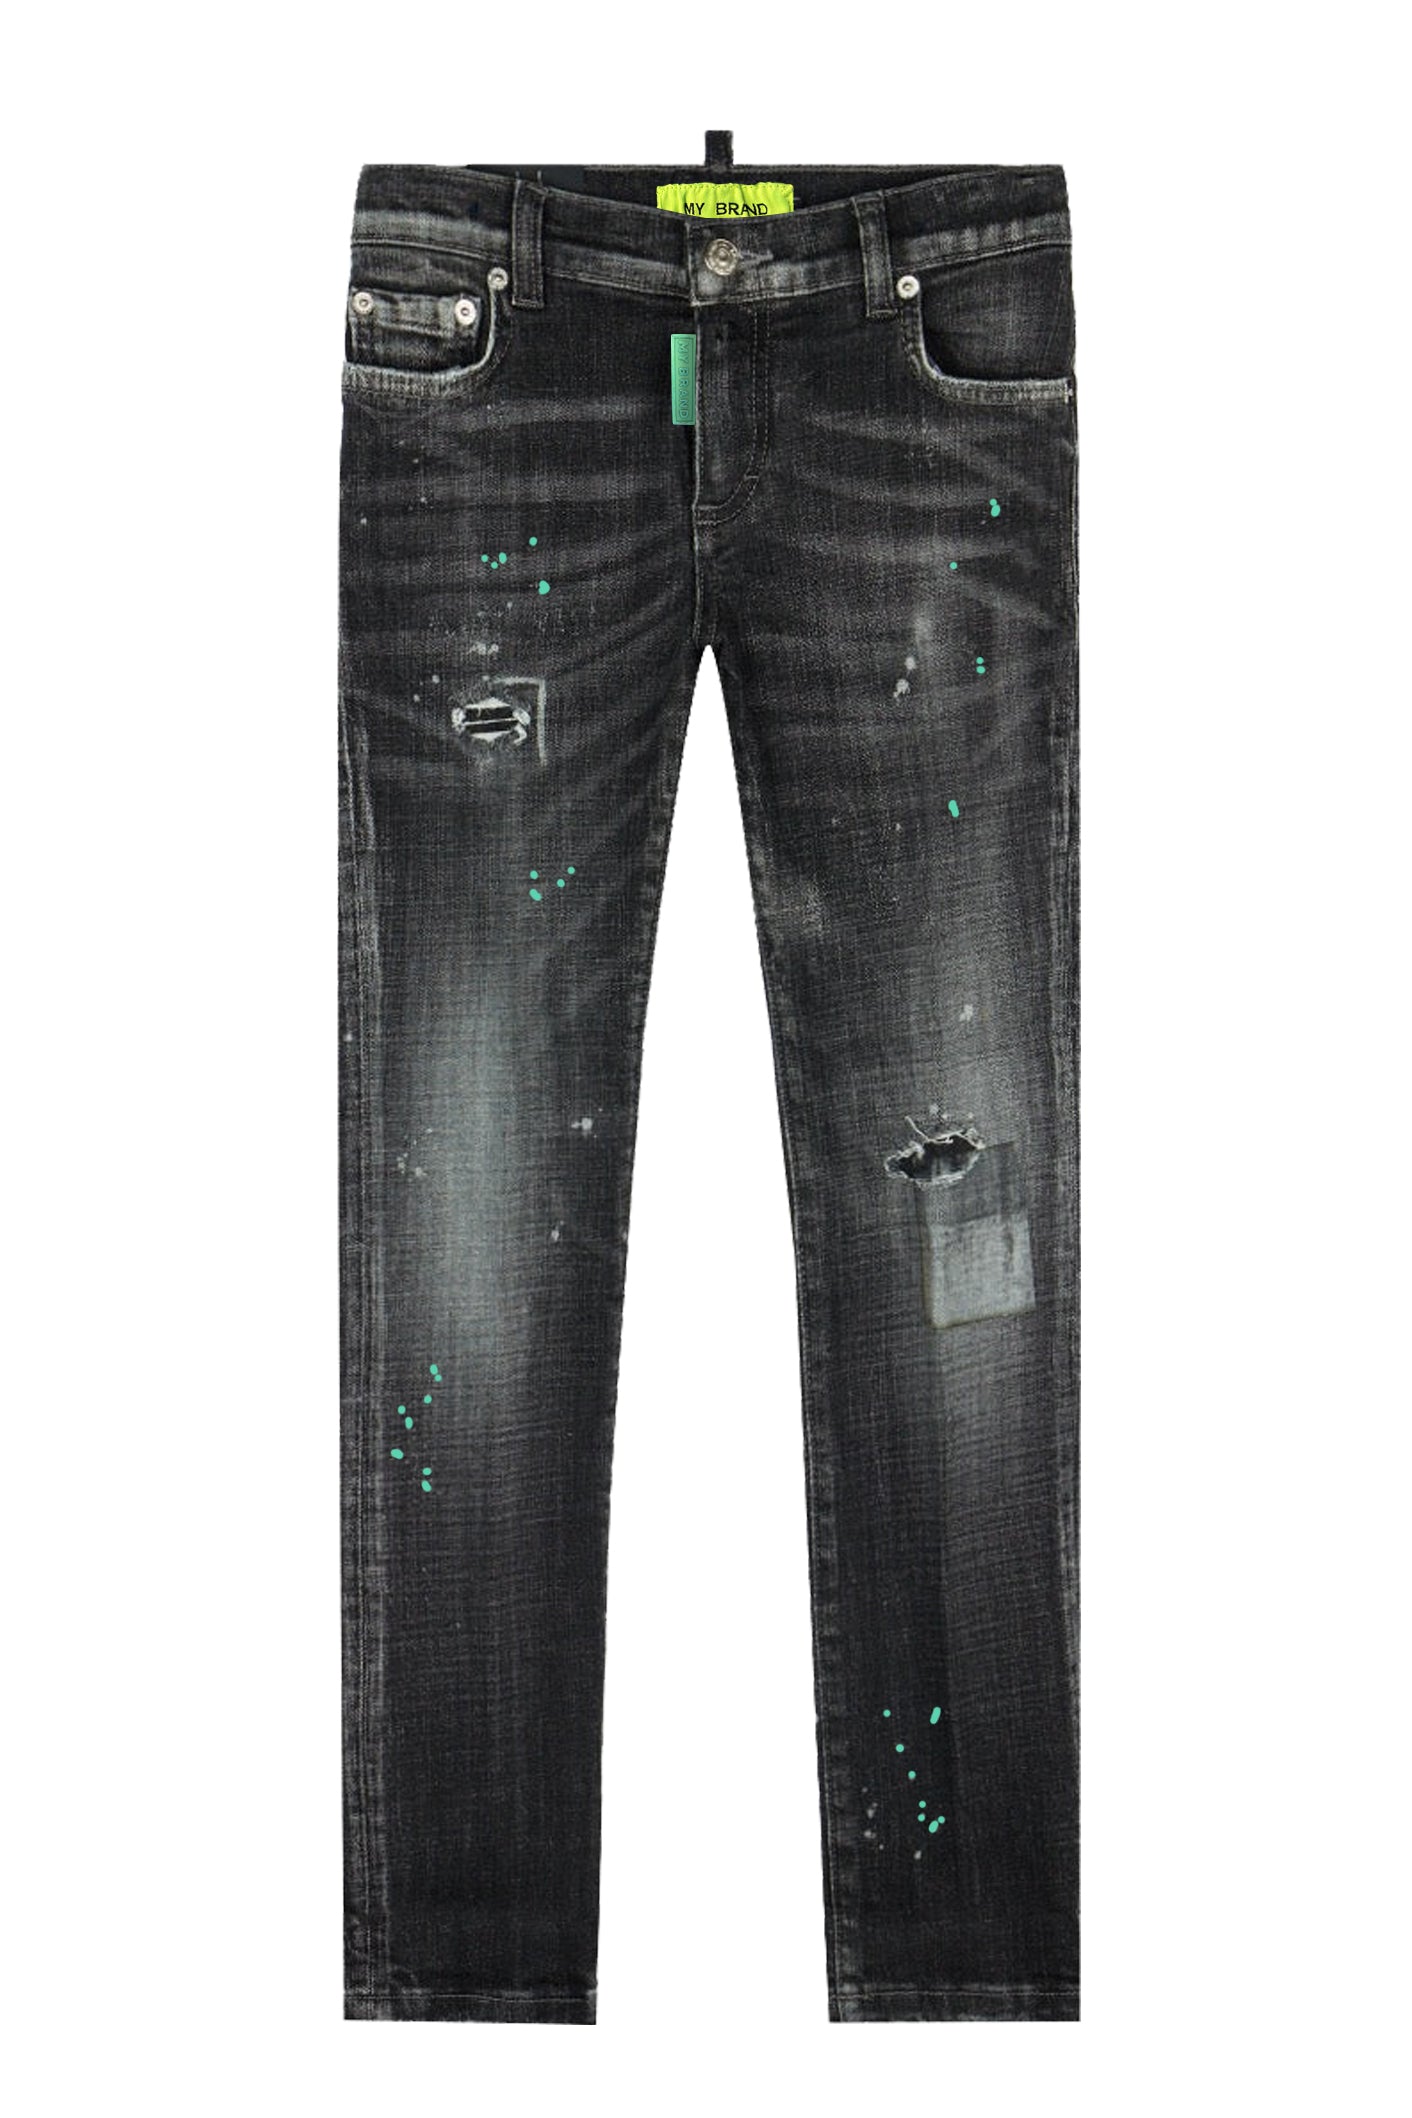 Black Distressed Neon Green Jeans